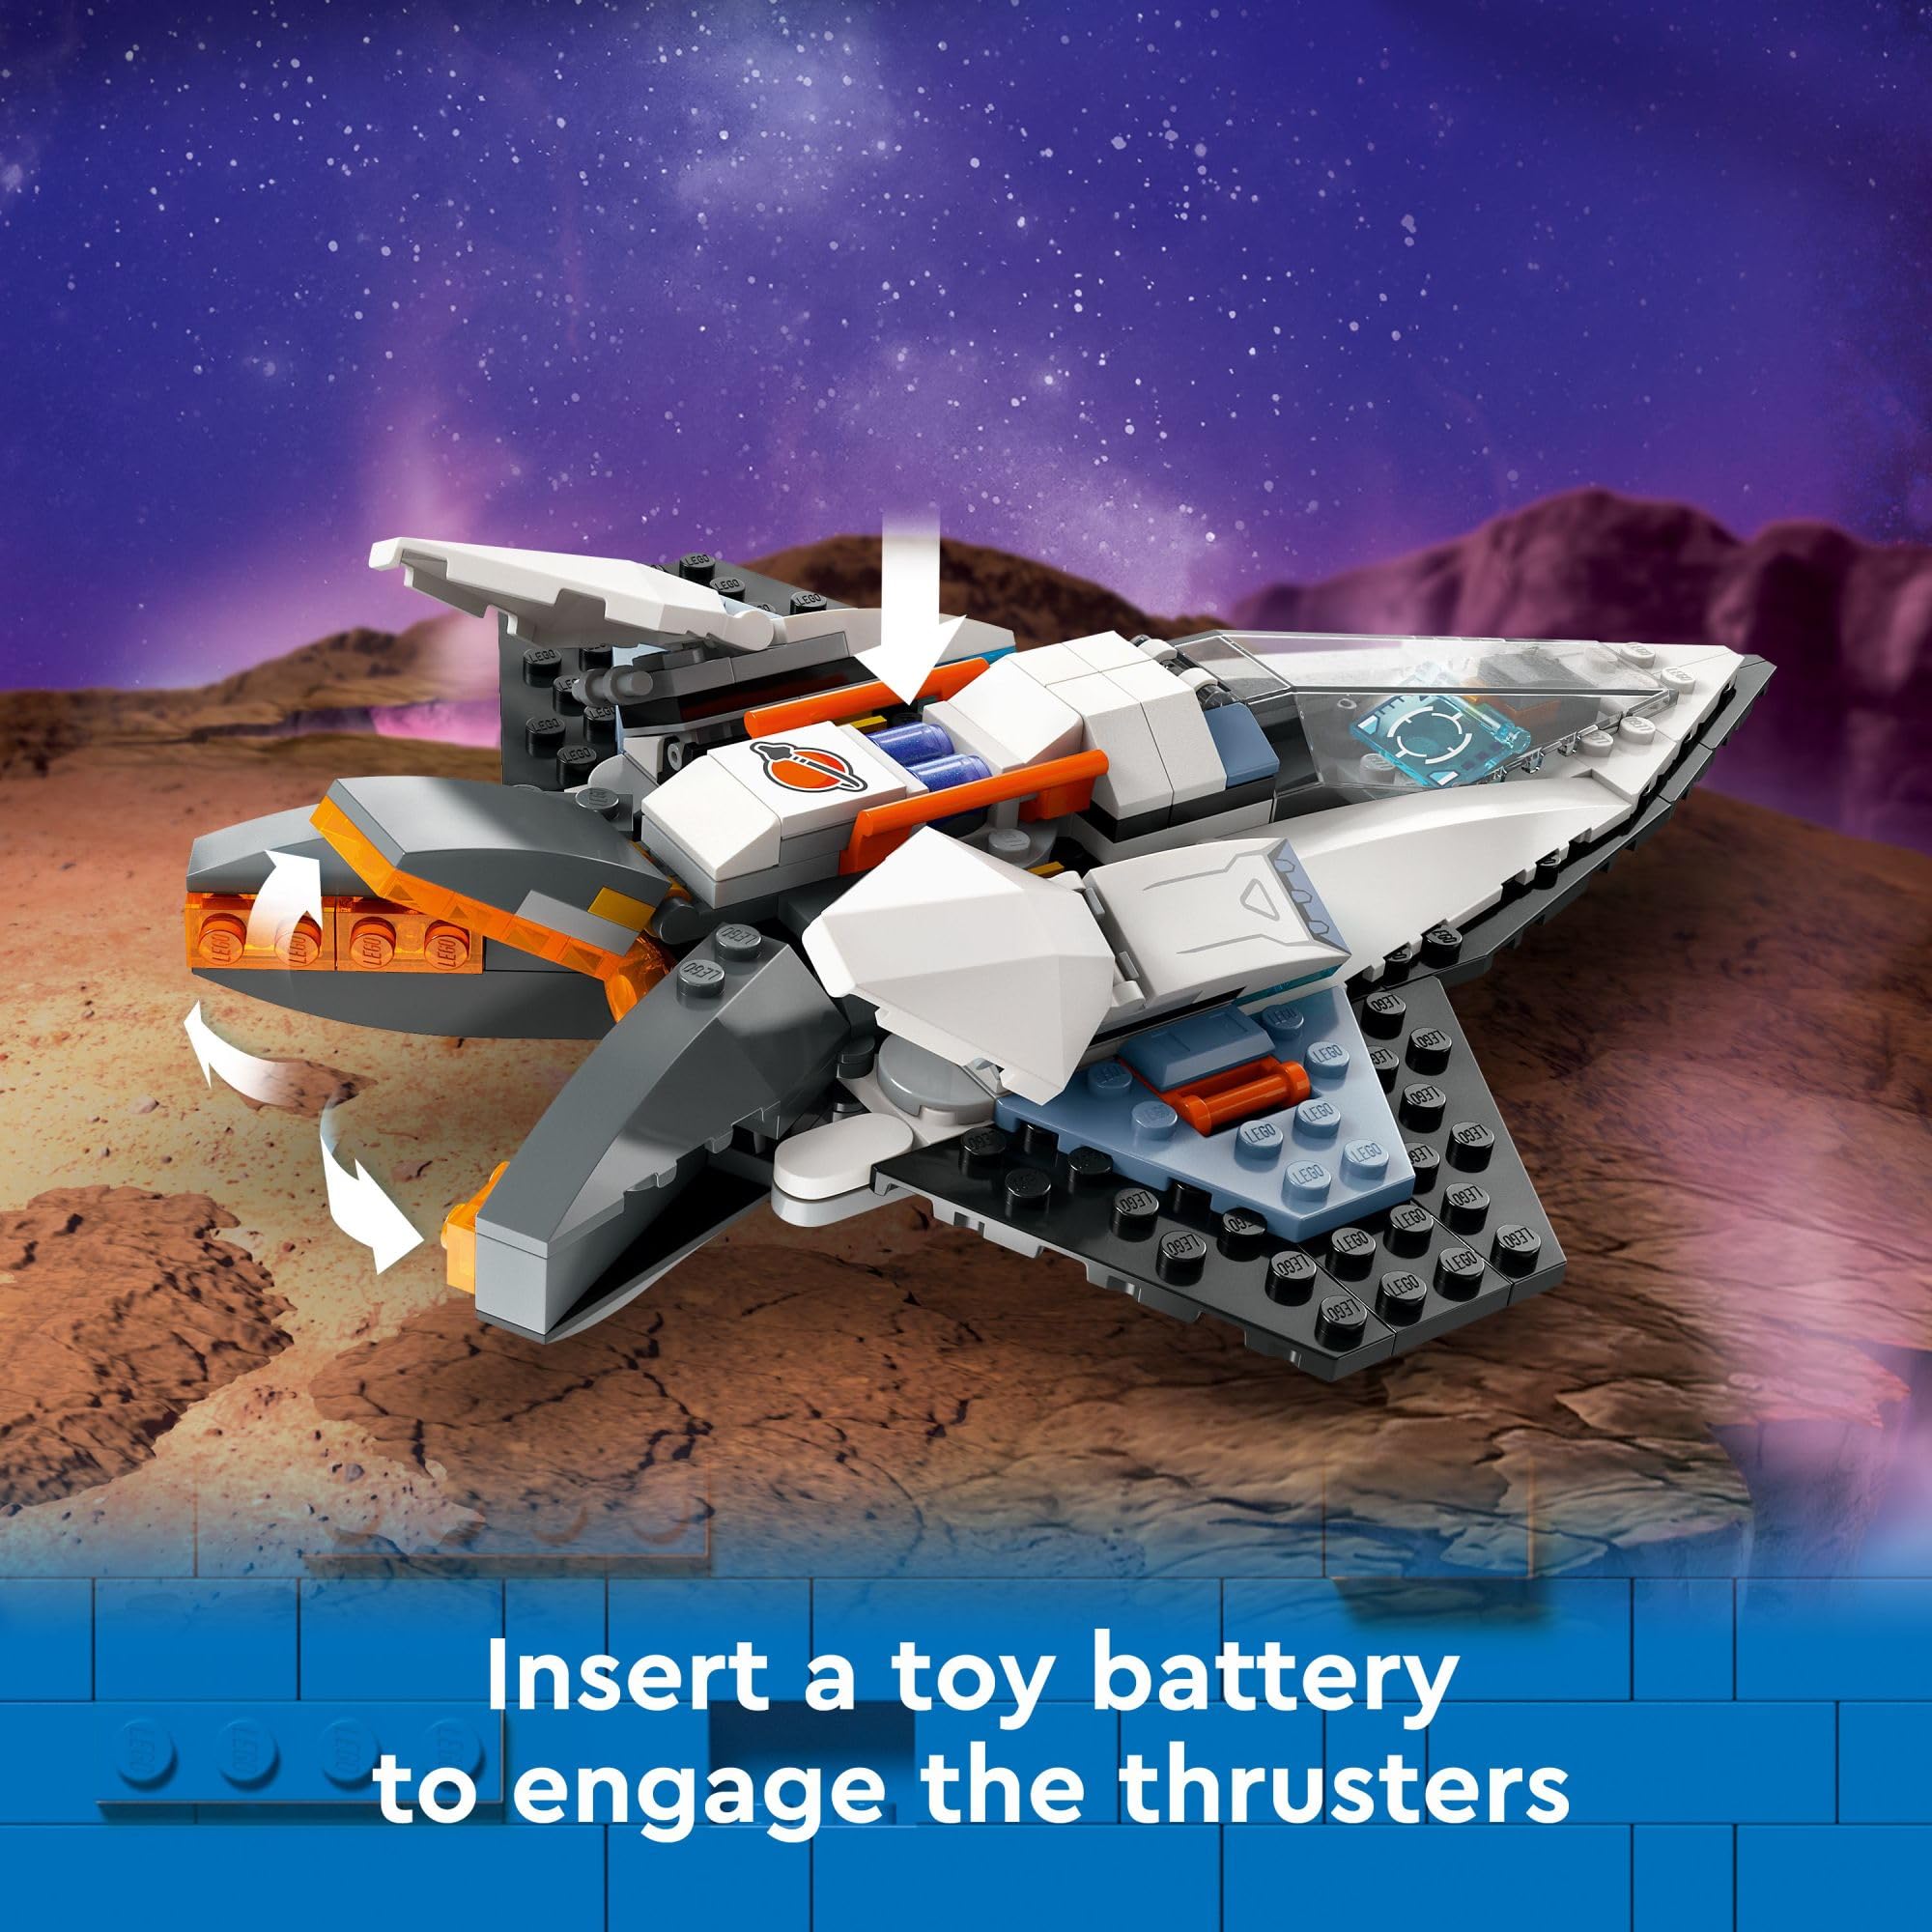 LEGO City Interstellar Spaceship Toy for Kids, Creative Play Space Toy, Building Set with Spacecraft Model, Drone, and Astronaut Figure, Building Toy for Boys, Girls and Kids Ages 6 and Up, 60430